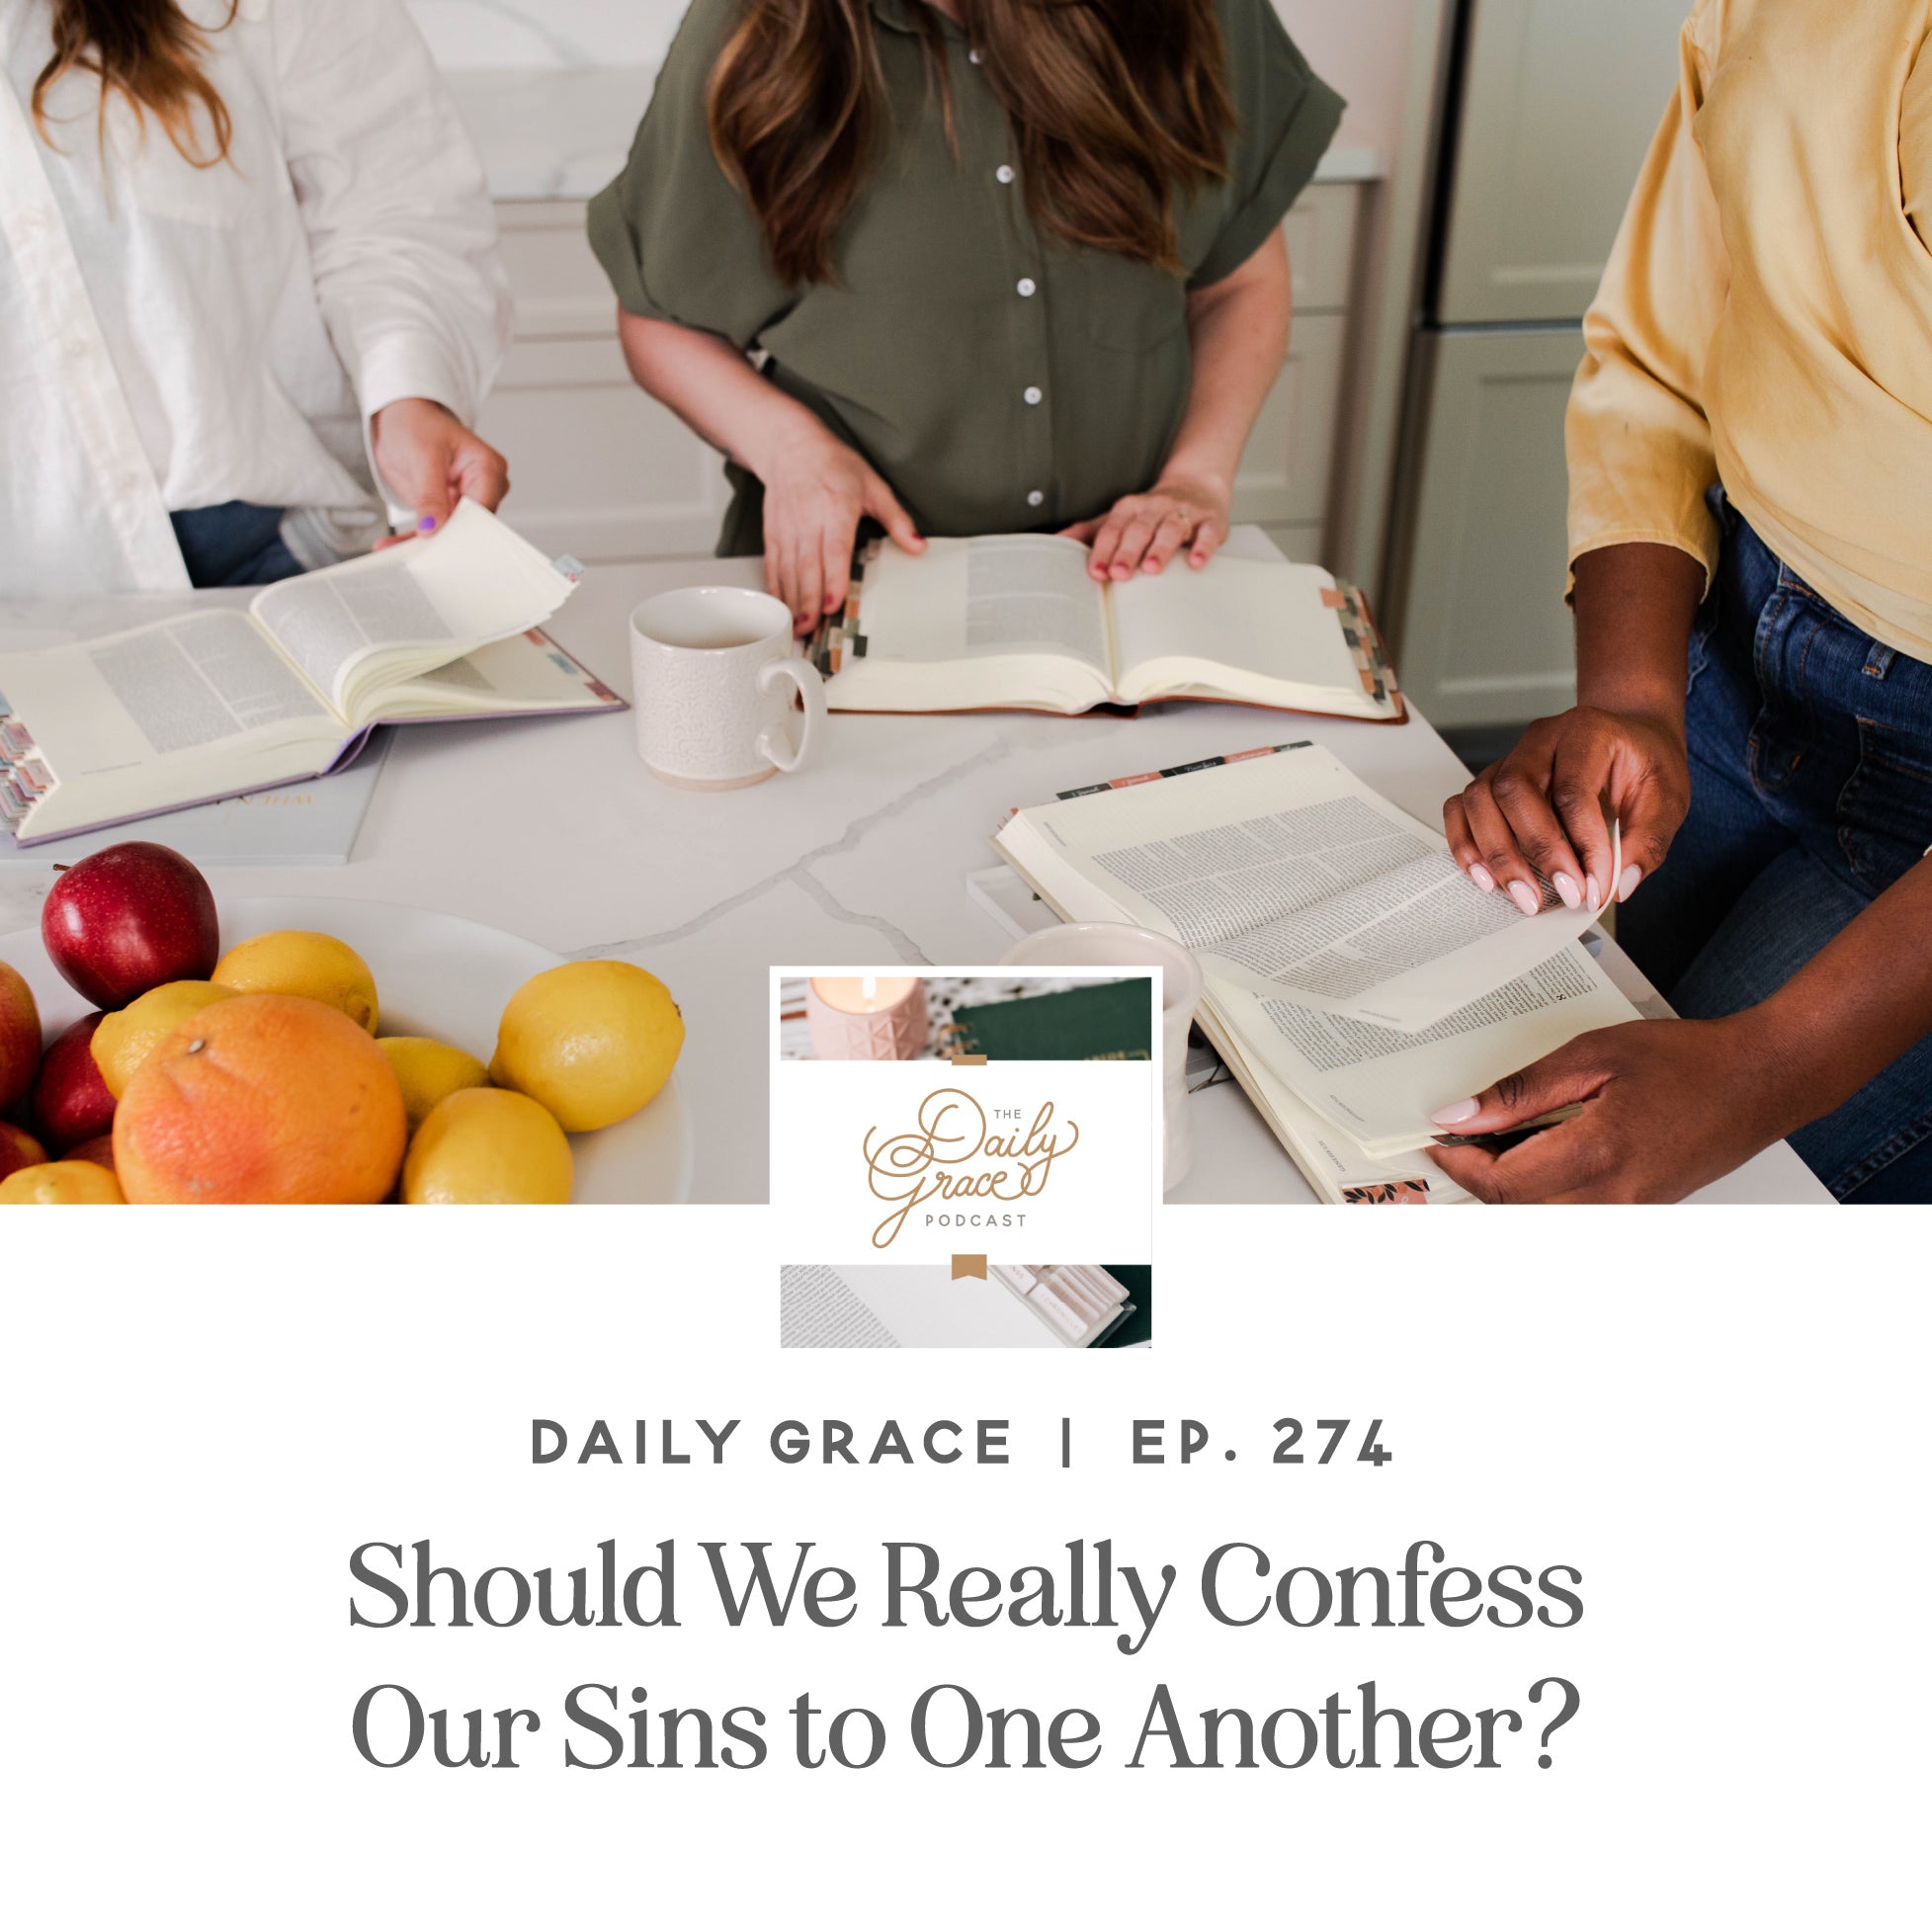 One Another Part 2 - Confess Your Sins/Pray for One Another